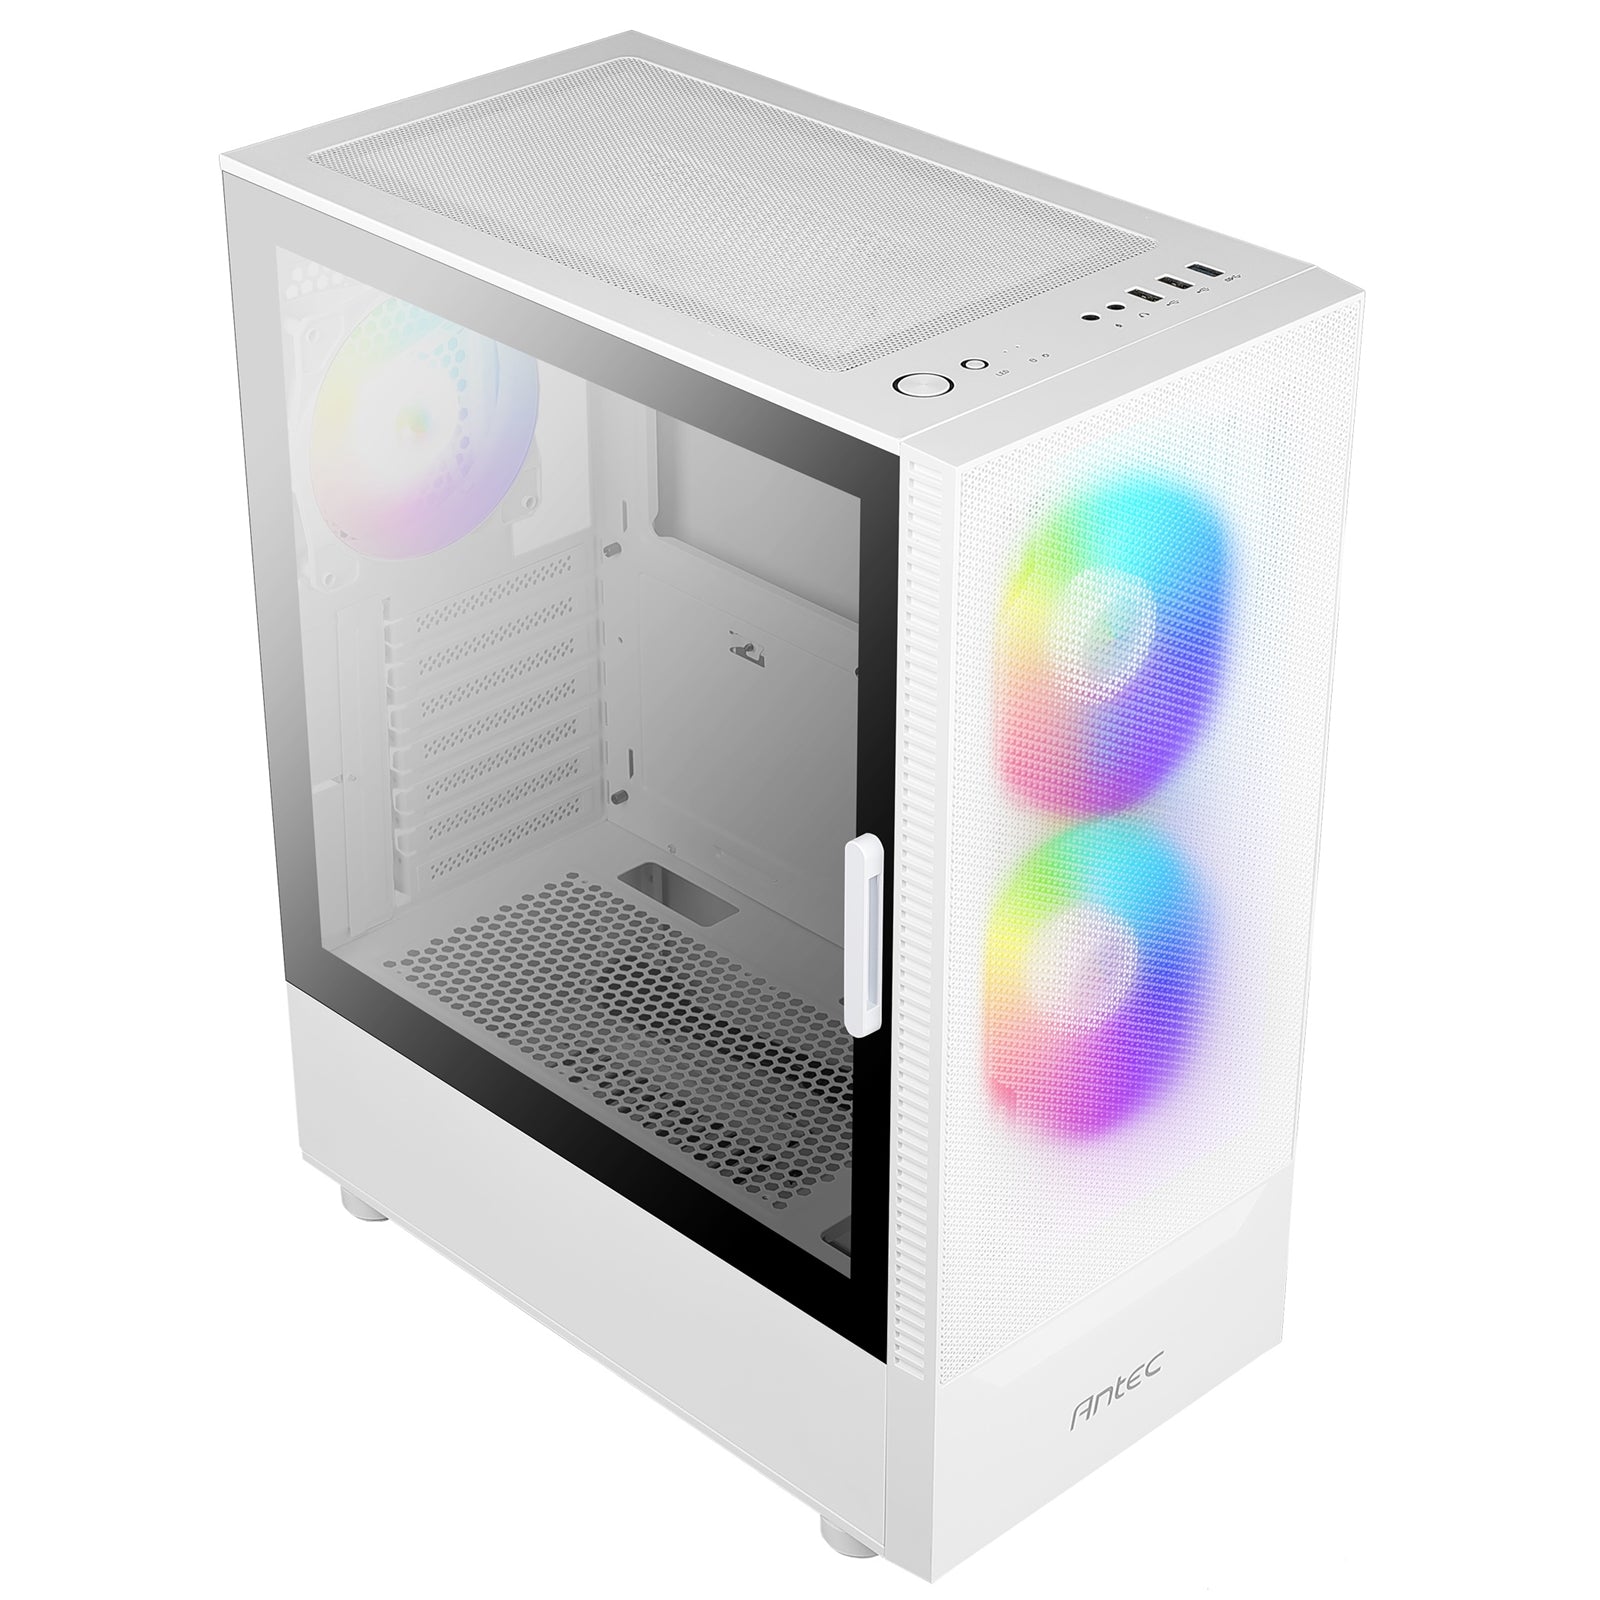 ANTEC NX410 Case, Gaming, White, Mid Tower, 1 x USB 3.0 / 2 x USB 2.0, Tempered Glass Side Window Panel